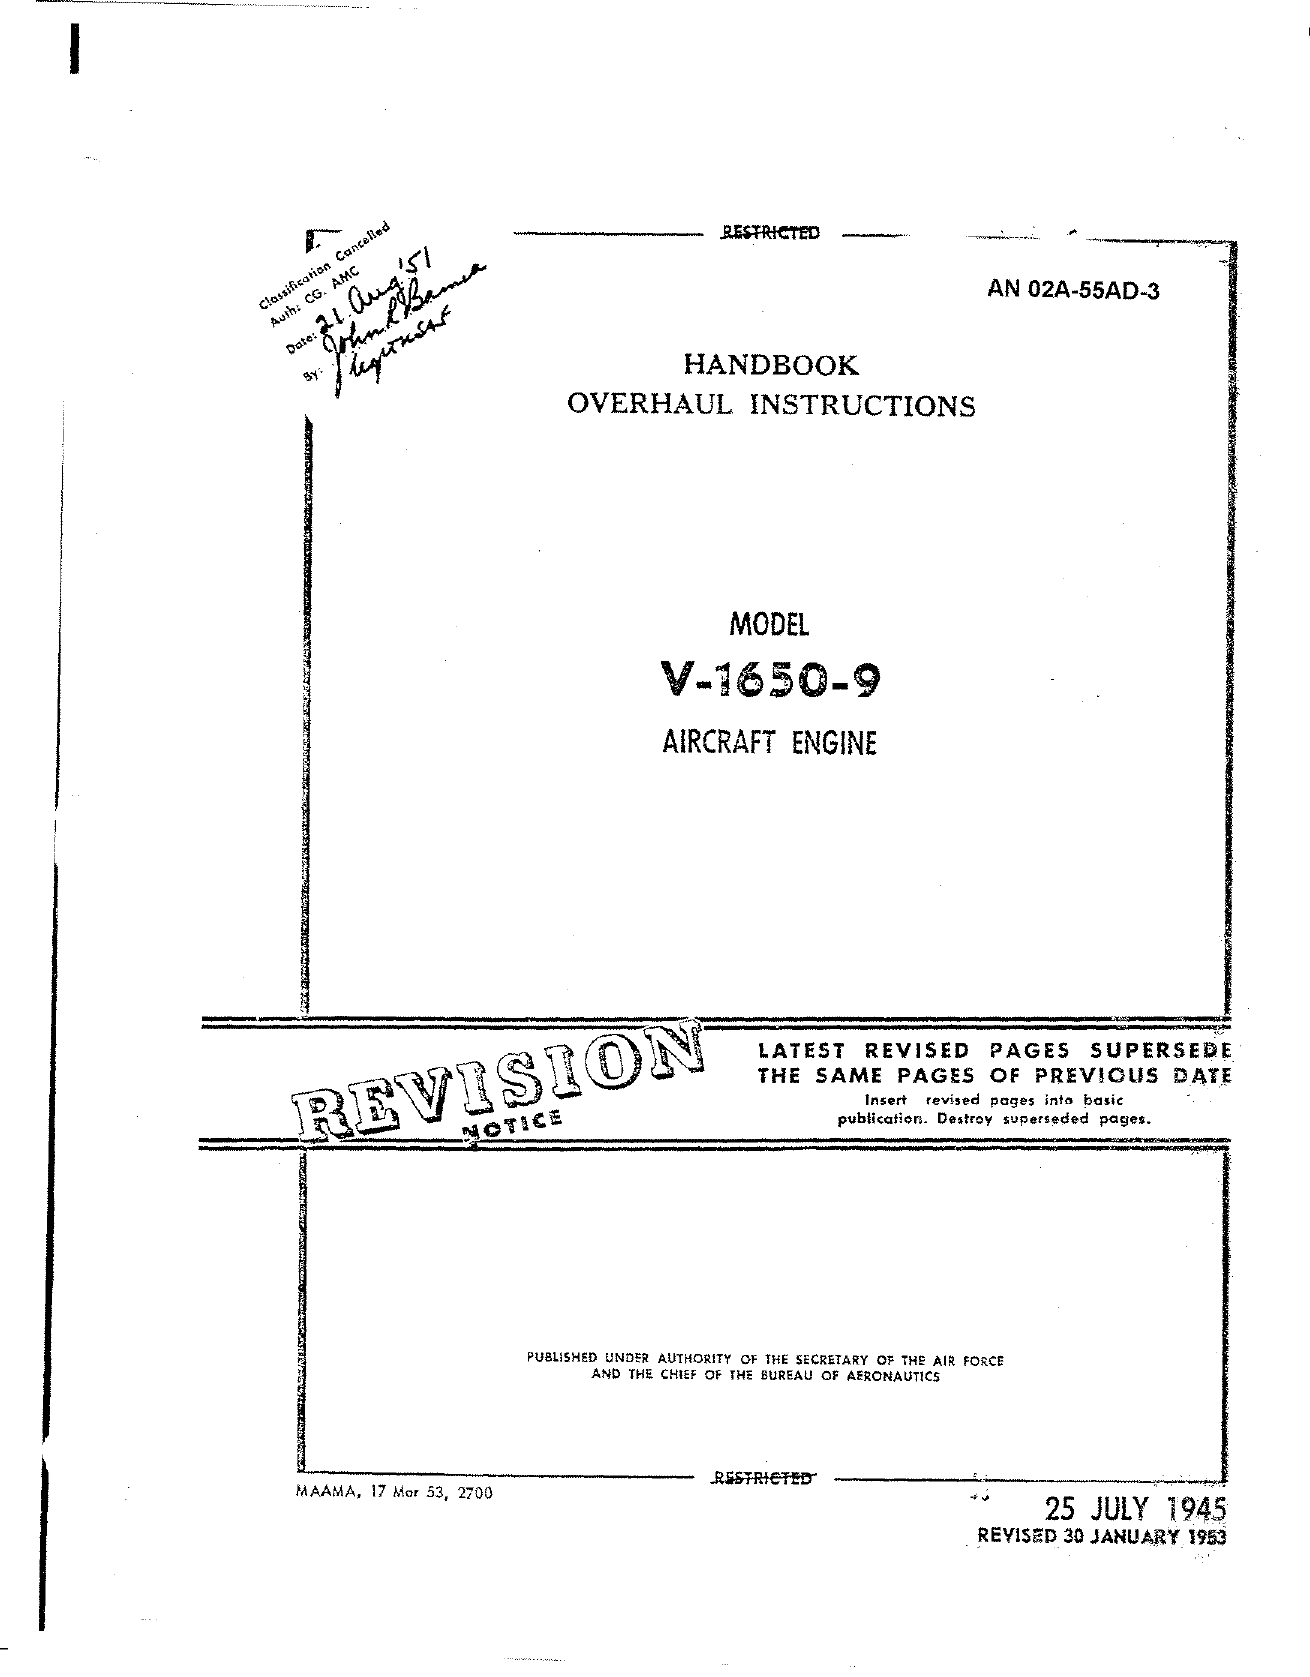 Sample page 1 from AirCorps Library document: Overhaul Instructions for Model V-1650-9 Engine